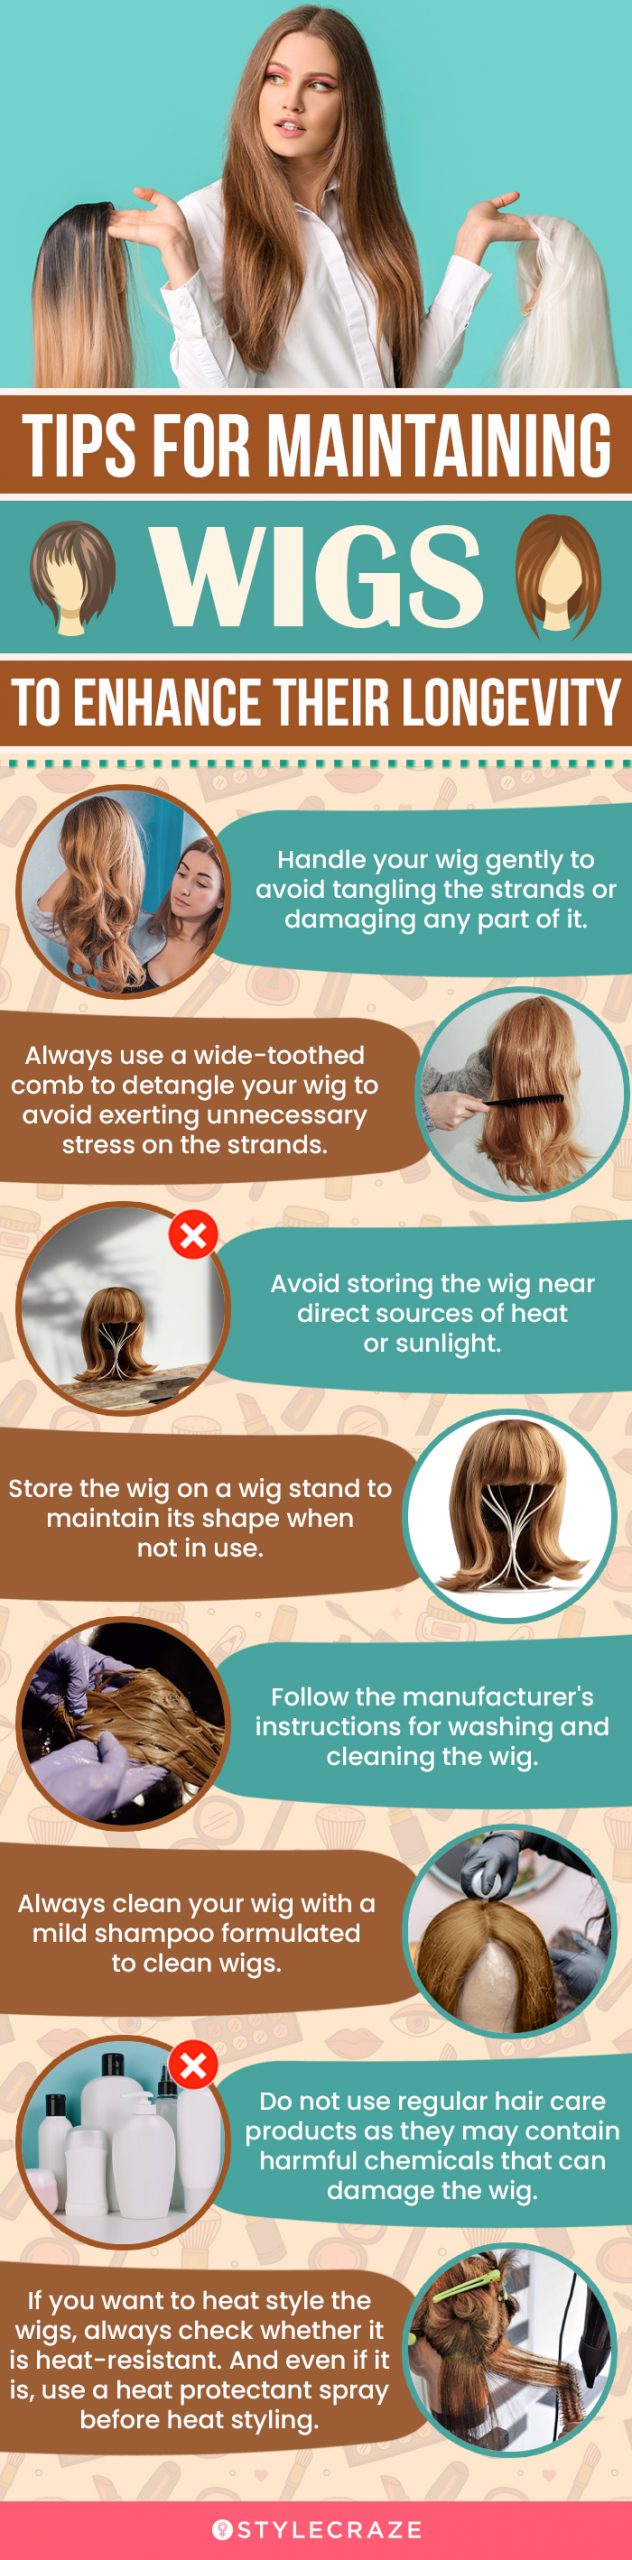 Tips For Maintaining Wigs To Enhance Their Longevity(infographic)